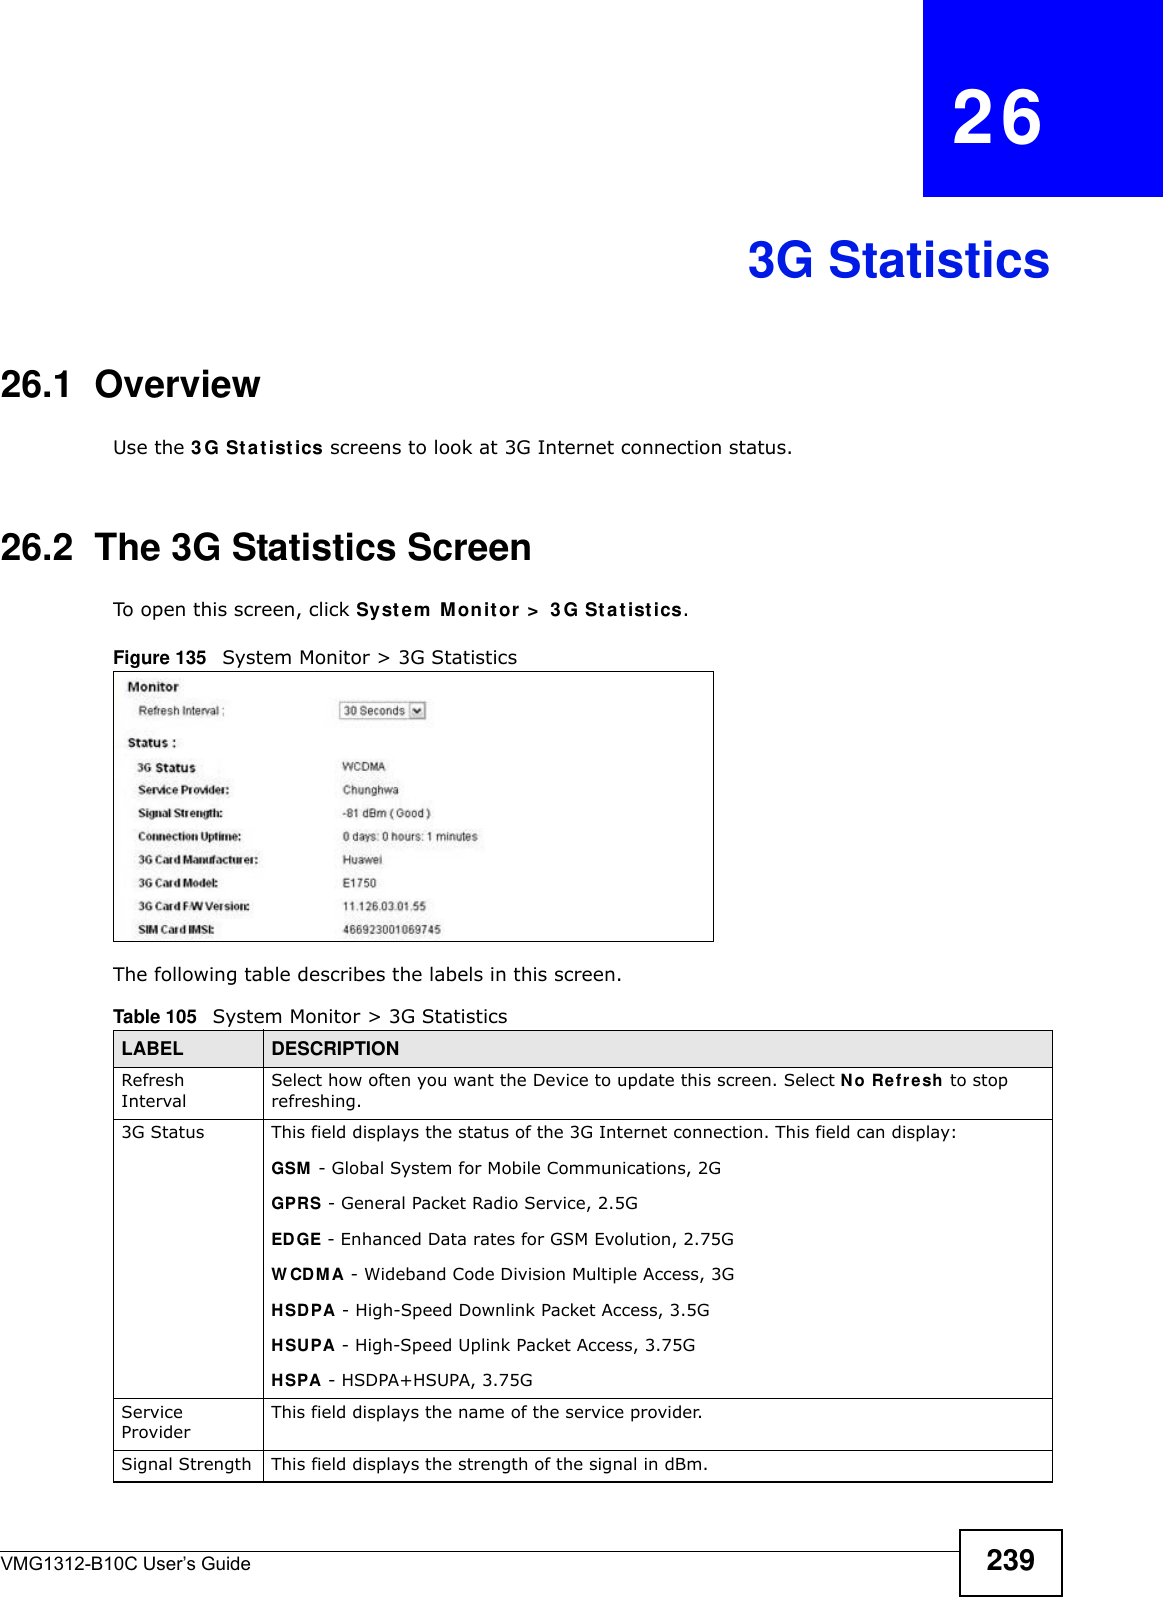 VMG1312-B10C User’s Guide 239CHAPTER   263G Statistics26.1  OverviewUse the 3 G St a t ist ics screens to look at 3G Internet connection status. 26.2  The 3G Statistics ScreenTo open this screen, click Syst em  Mon it or  &gt;  3 G St at ist ics.Figure 135   System Monitor &gt; 3G Statistics The following table describes the labels in this screen.  Table 105   System Monitor &gt; 3G StatisticsLABEL DESCRIPTIONRefresh IntervalSelect how often you want the Device to update this screen. Select N o Refresh to stop refreshing.3G Status This field displays the status of the 3G Internet connection. This field can display:GSM  - Global System for Mobile Communications, 2GGPRS - General Packet Radio Service, 2.5GED GE - Enhanced Data rates for GSM Evolution, 2.75GW CDMA - Wideband Code Division Multiple Access, 3GHSDPA - High-Speed Downlink Packet Access, 3.5GHSUPA - High-Speed Uplink Packet Access, 3.75GHSPA - HSDPA+HSUPA, 3.75GService ProviderThis field displays the name of the service provider.Signal Strength This field displays the strength of the signal in dBm.